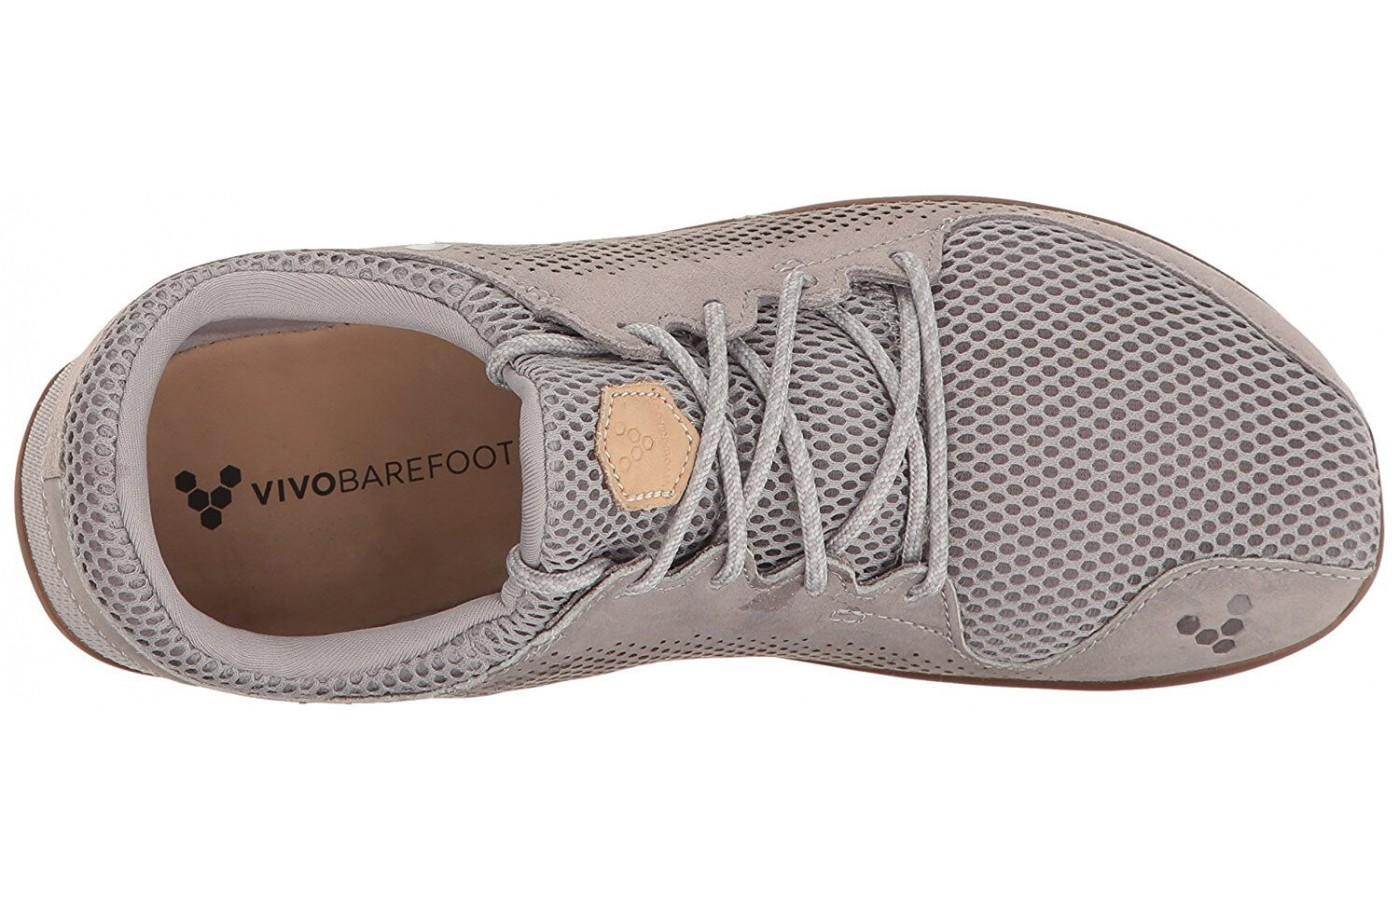 The Vivobarefoot Primus Trio has a leather footbed so that socks are not necessary